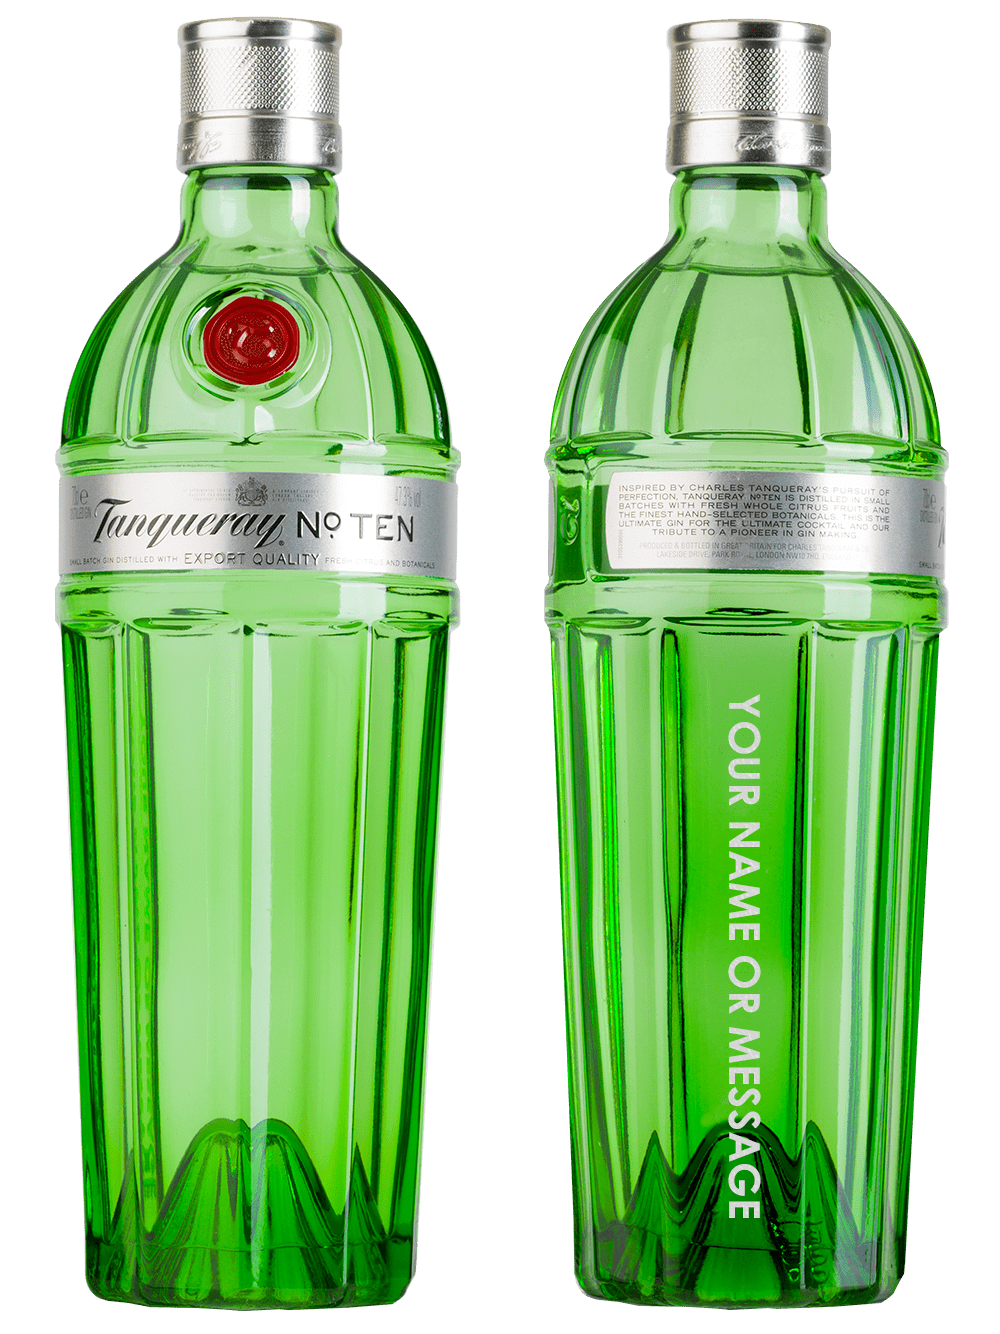 Personalised Tanqueray No. Ten bottle